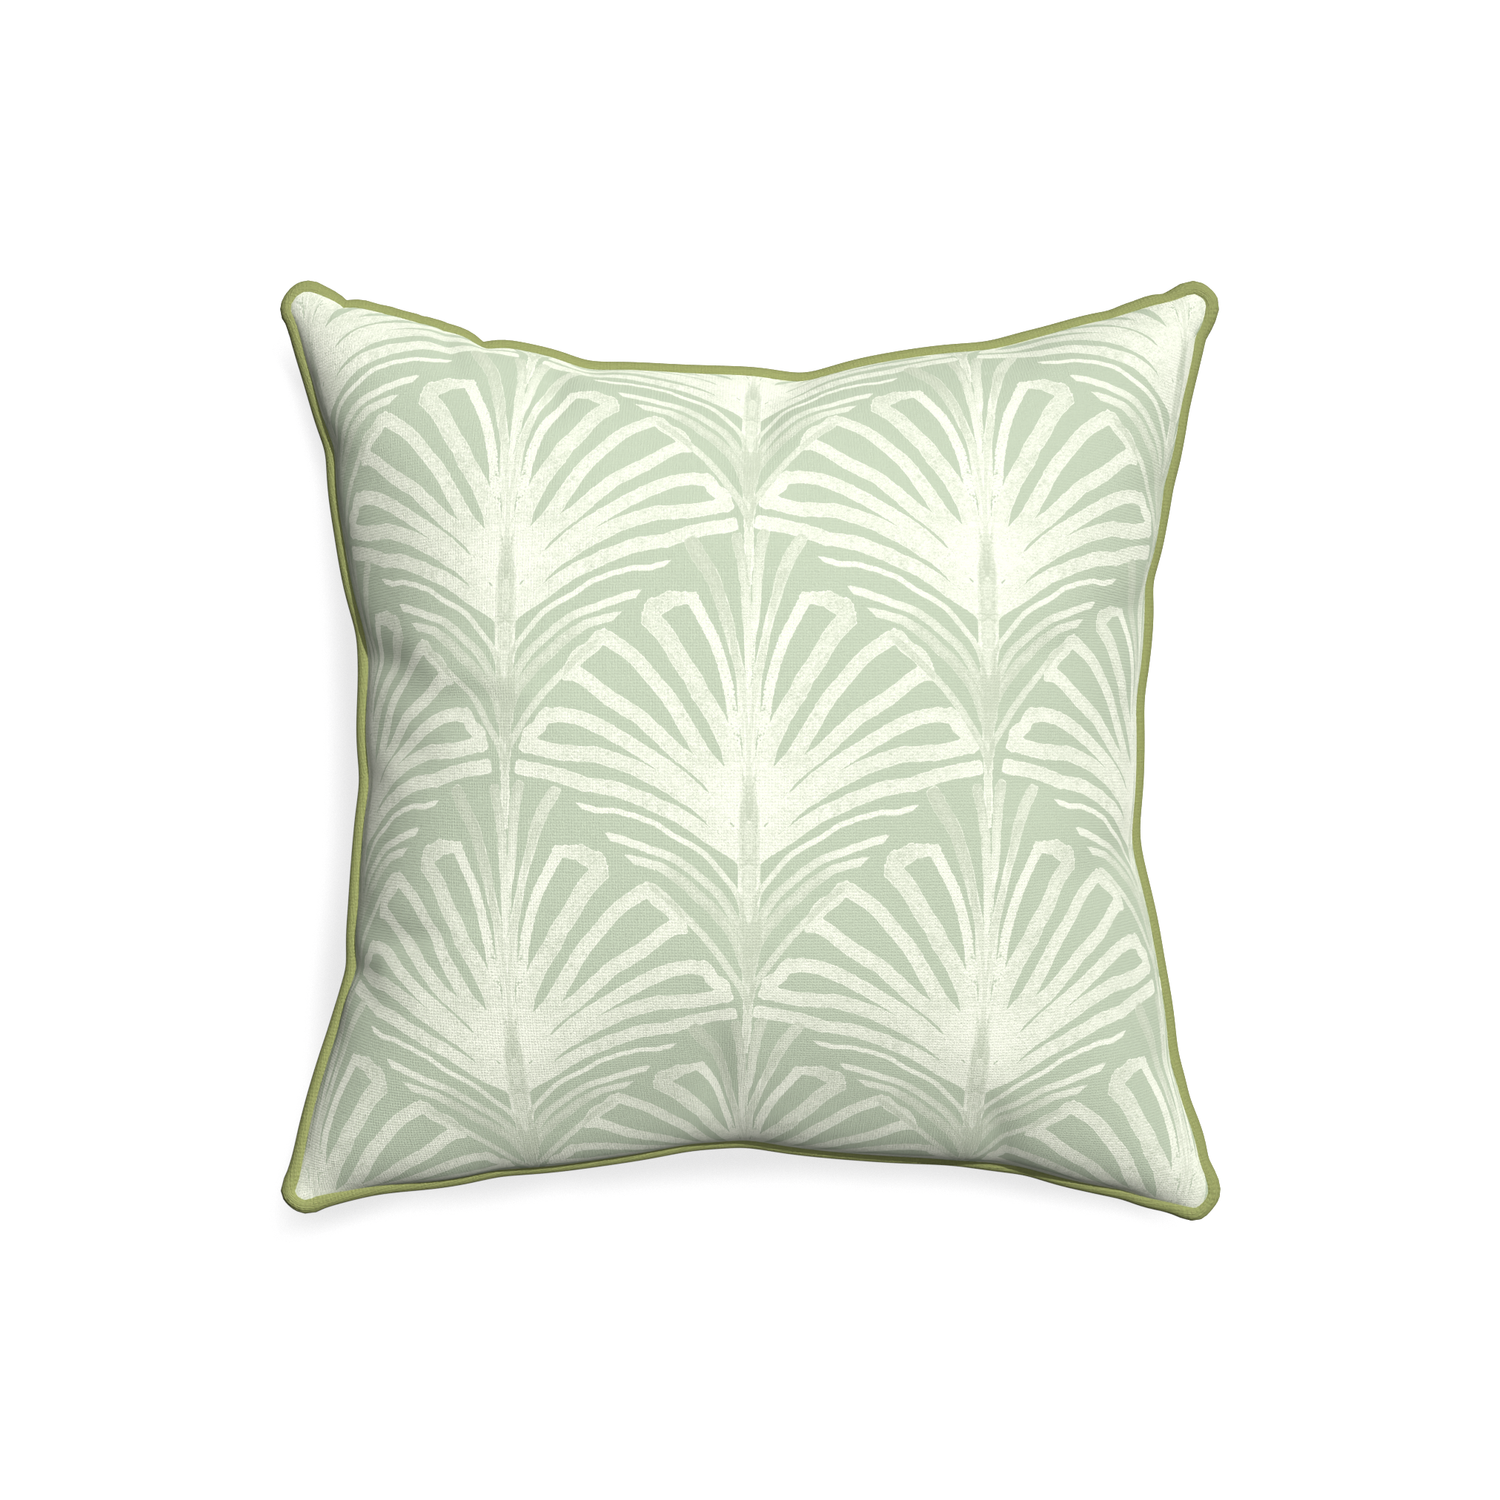 20-square suzy sage custom sage green palmpillow with moss piping on white background